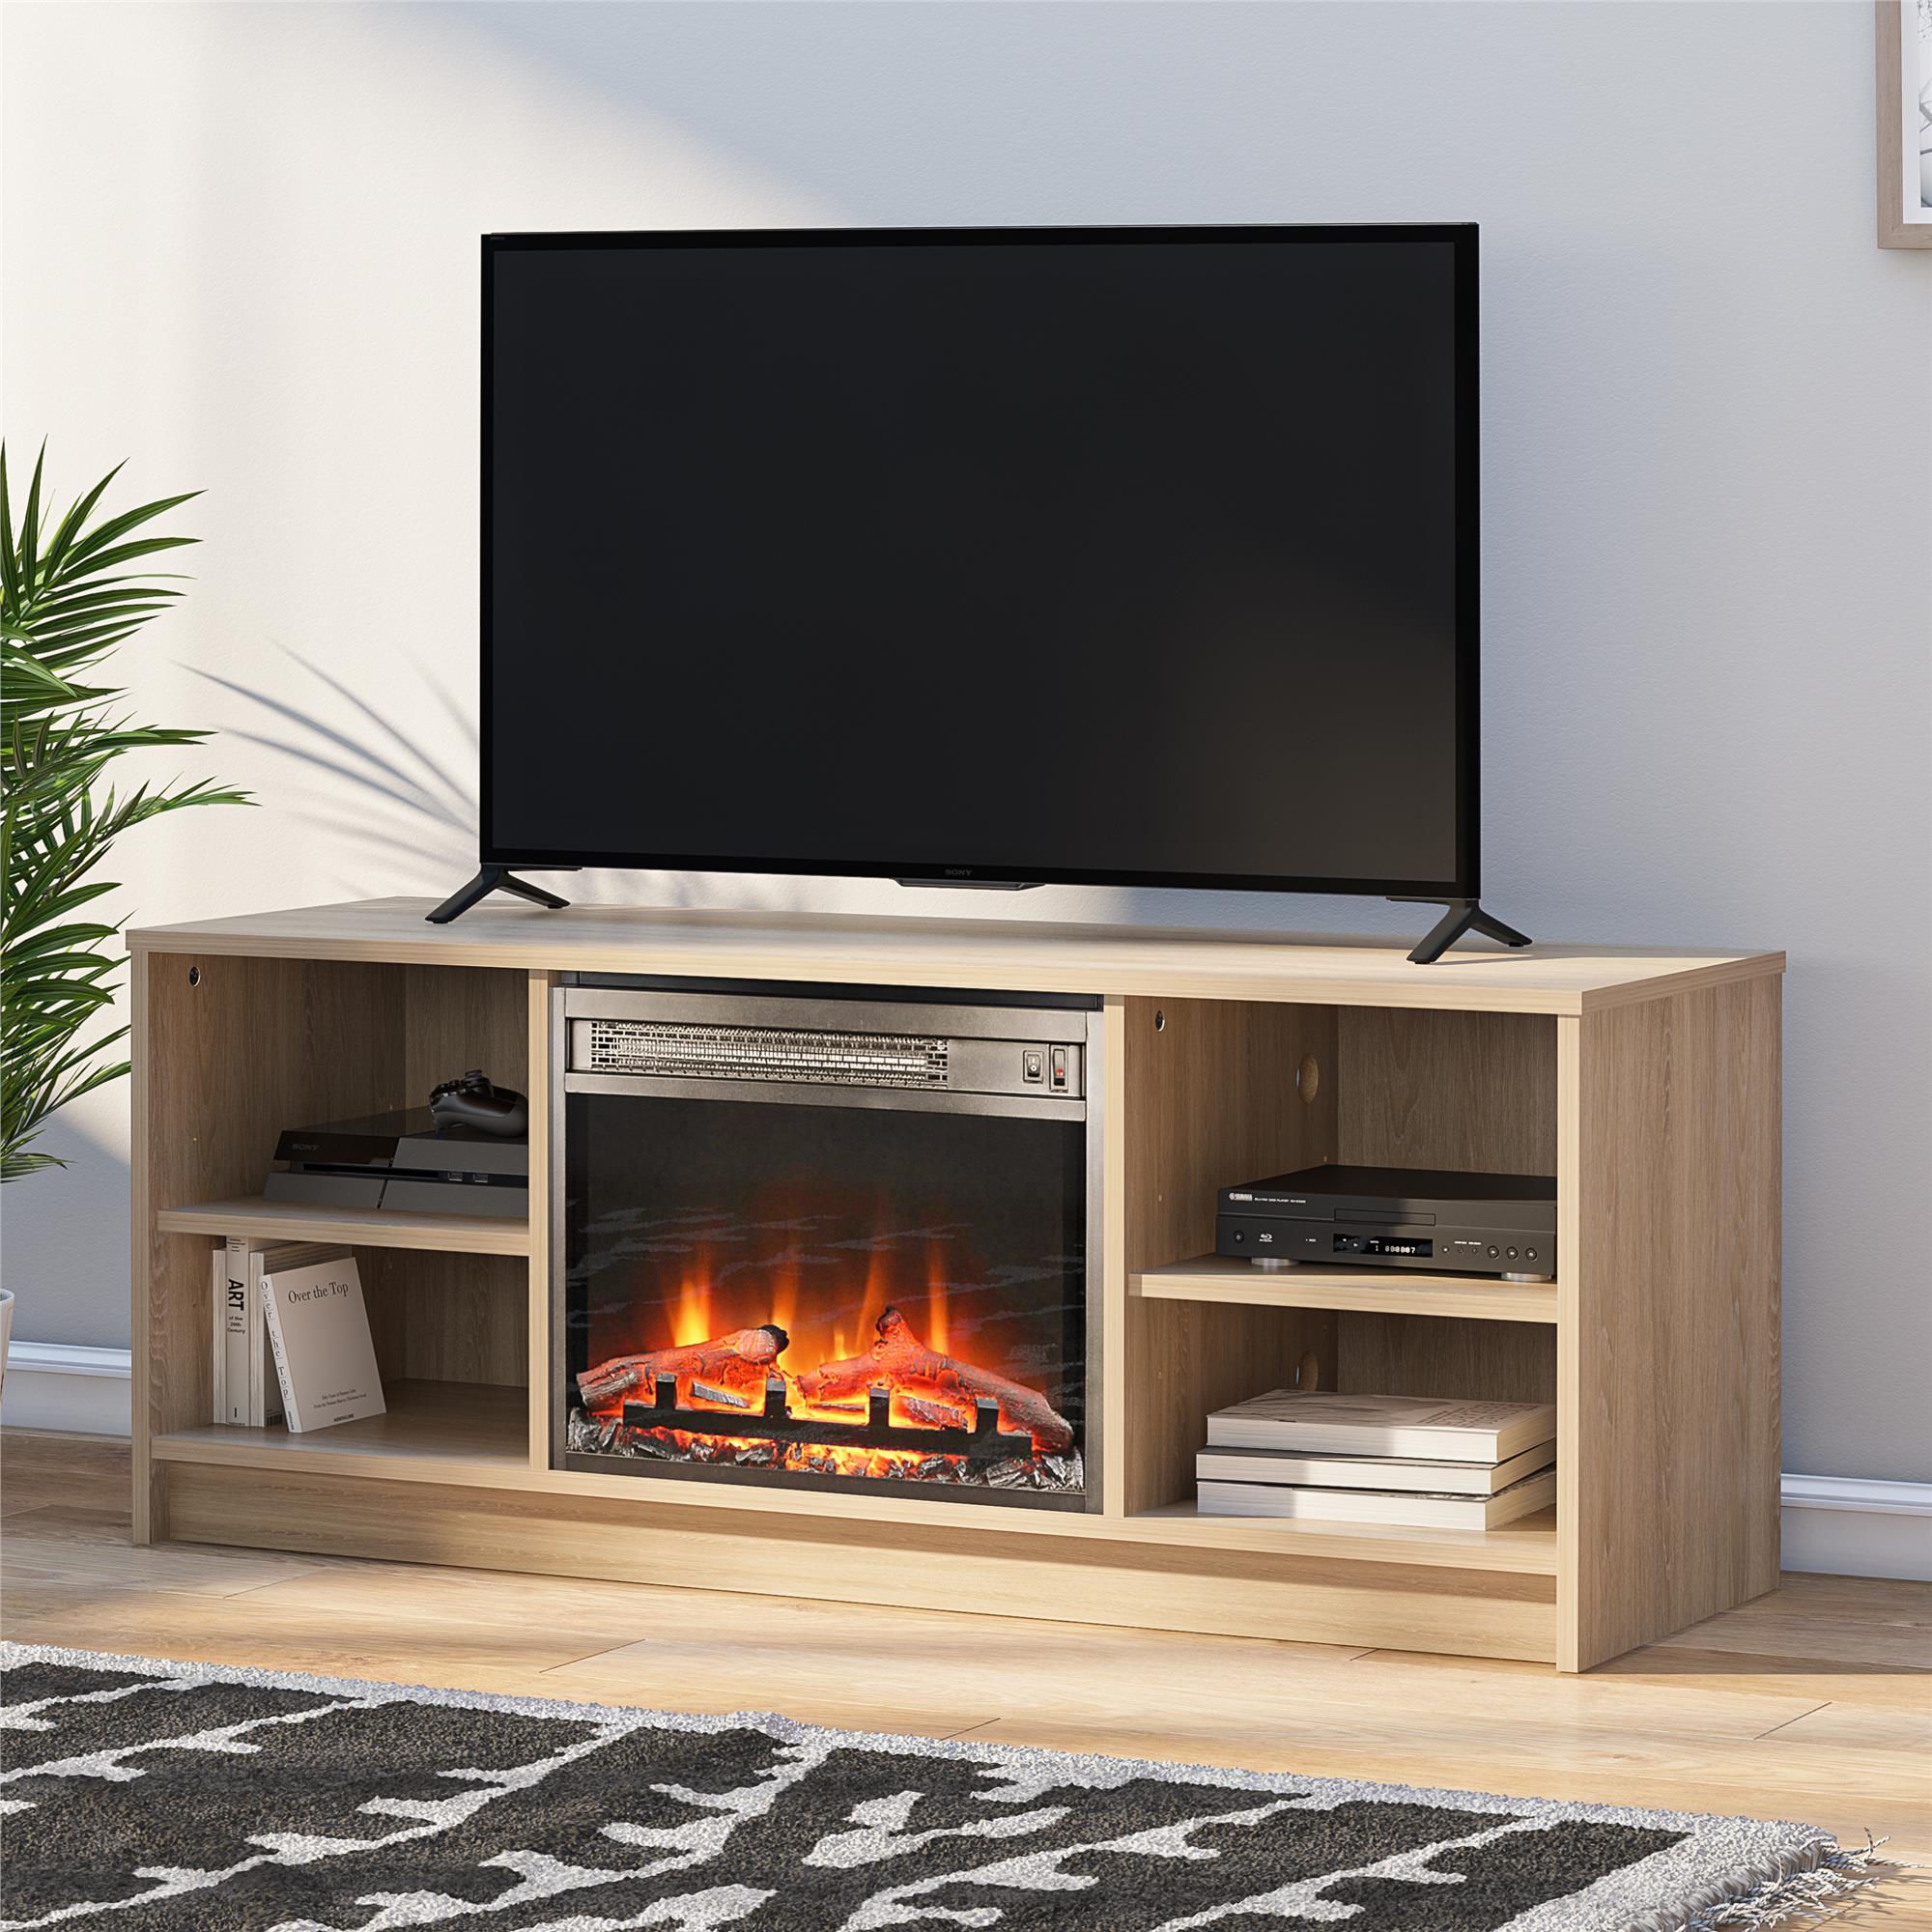 Mainstays Fireplace TV Stand, for TVs up to 55", Natural - image 1 of 12